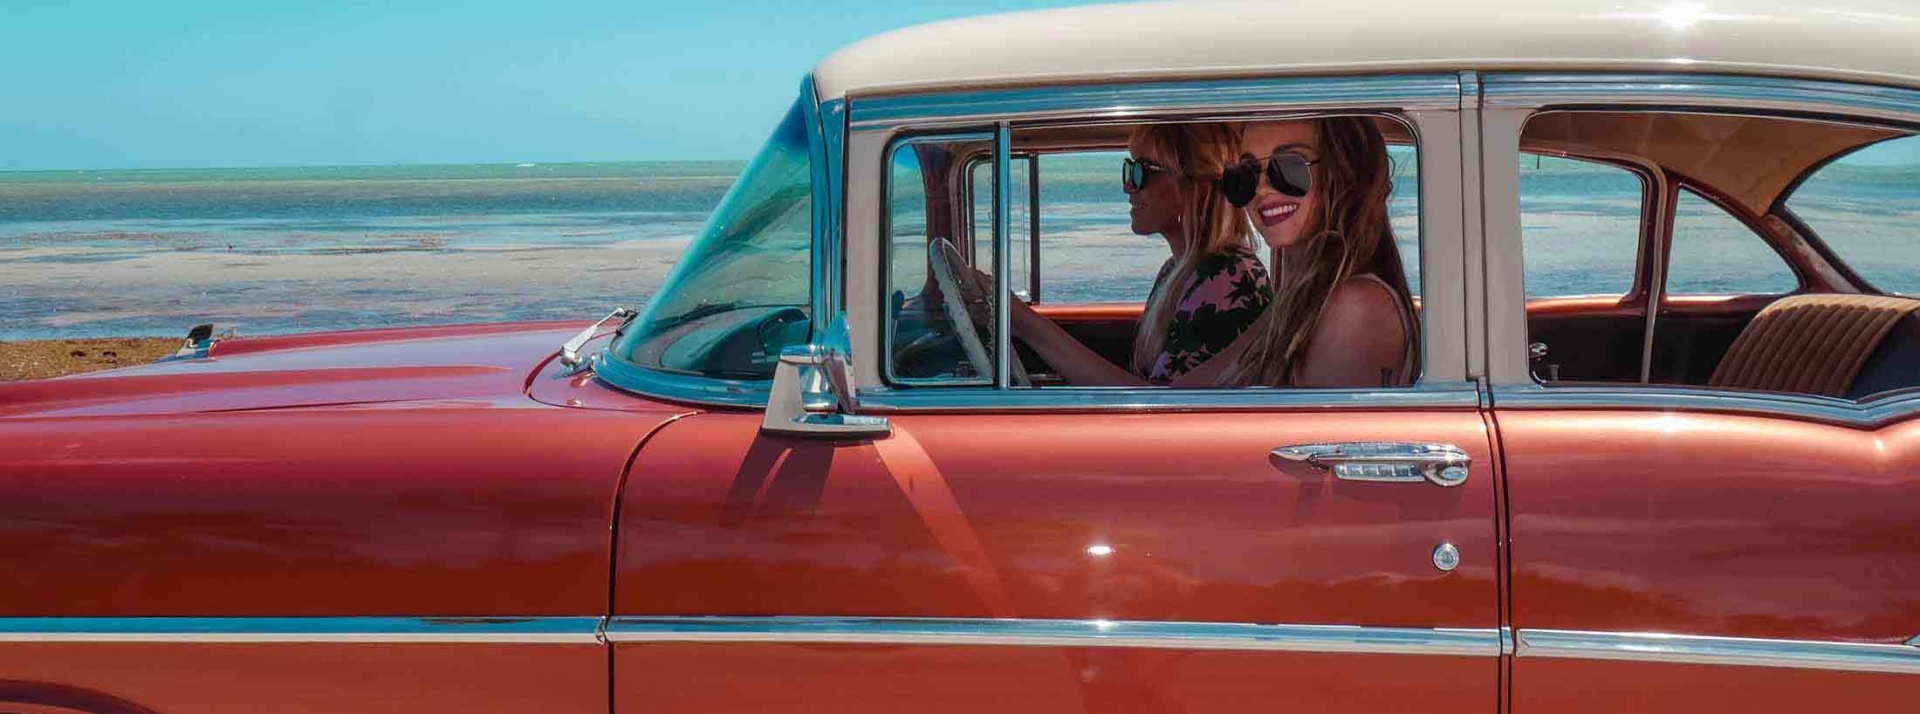 Two women driving a car smiling out the side window